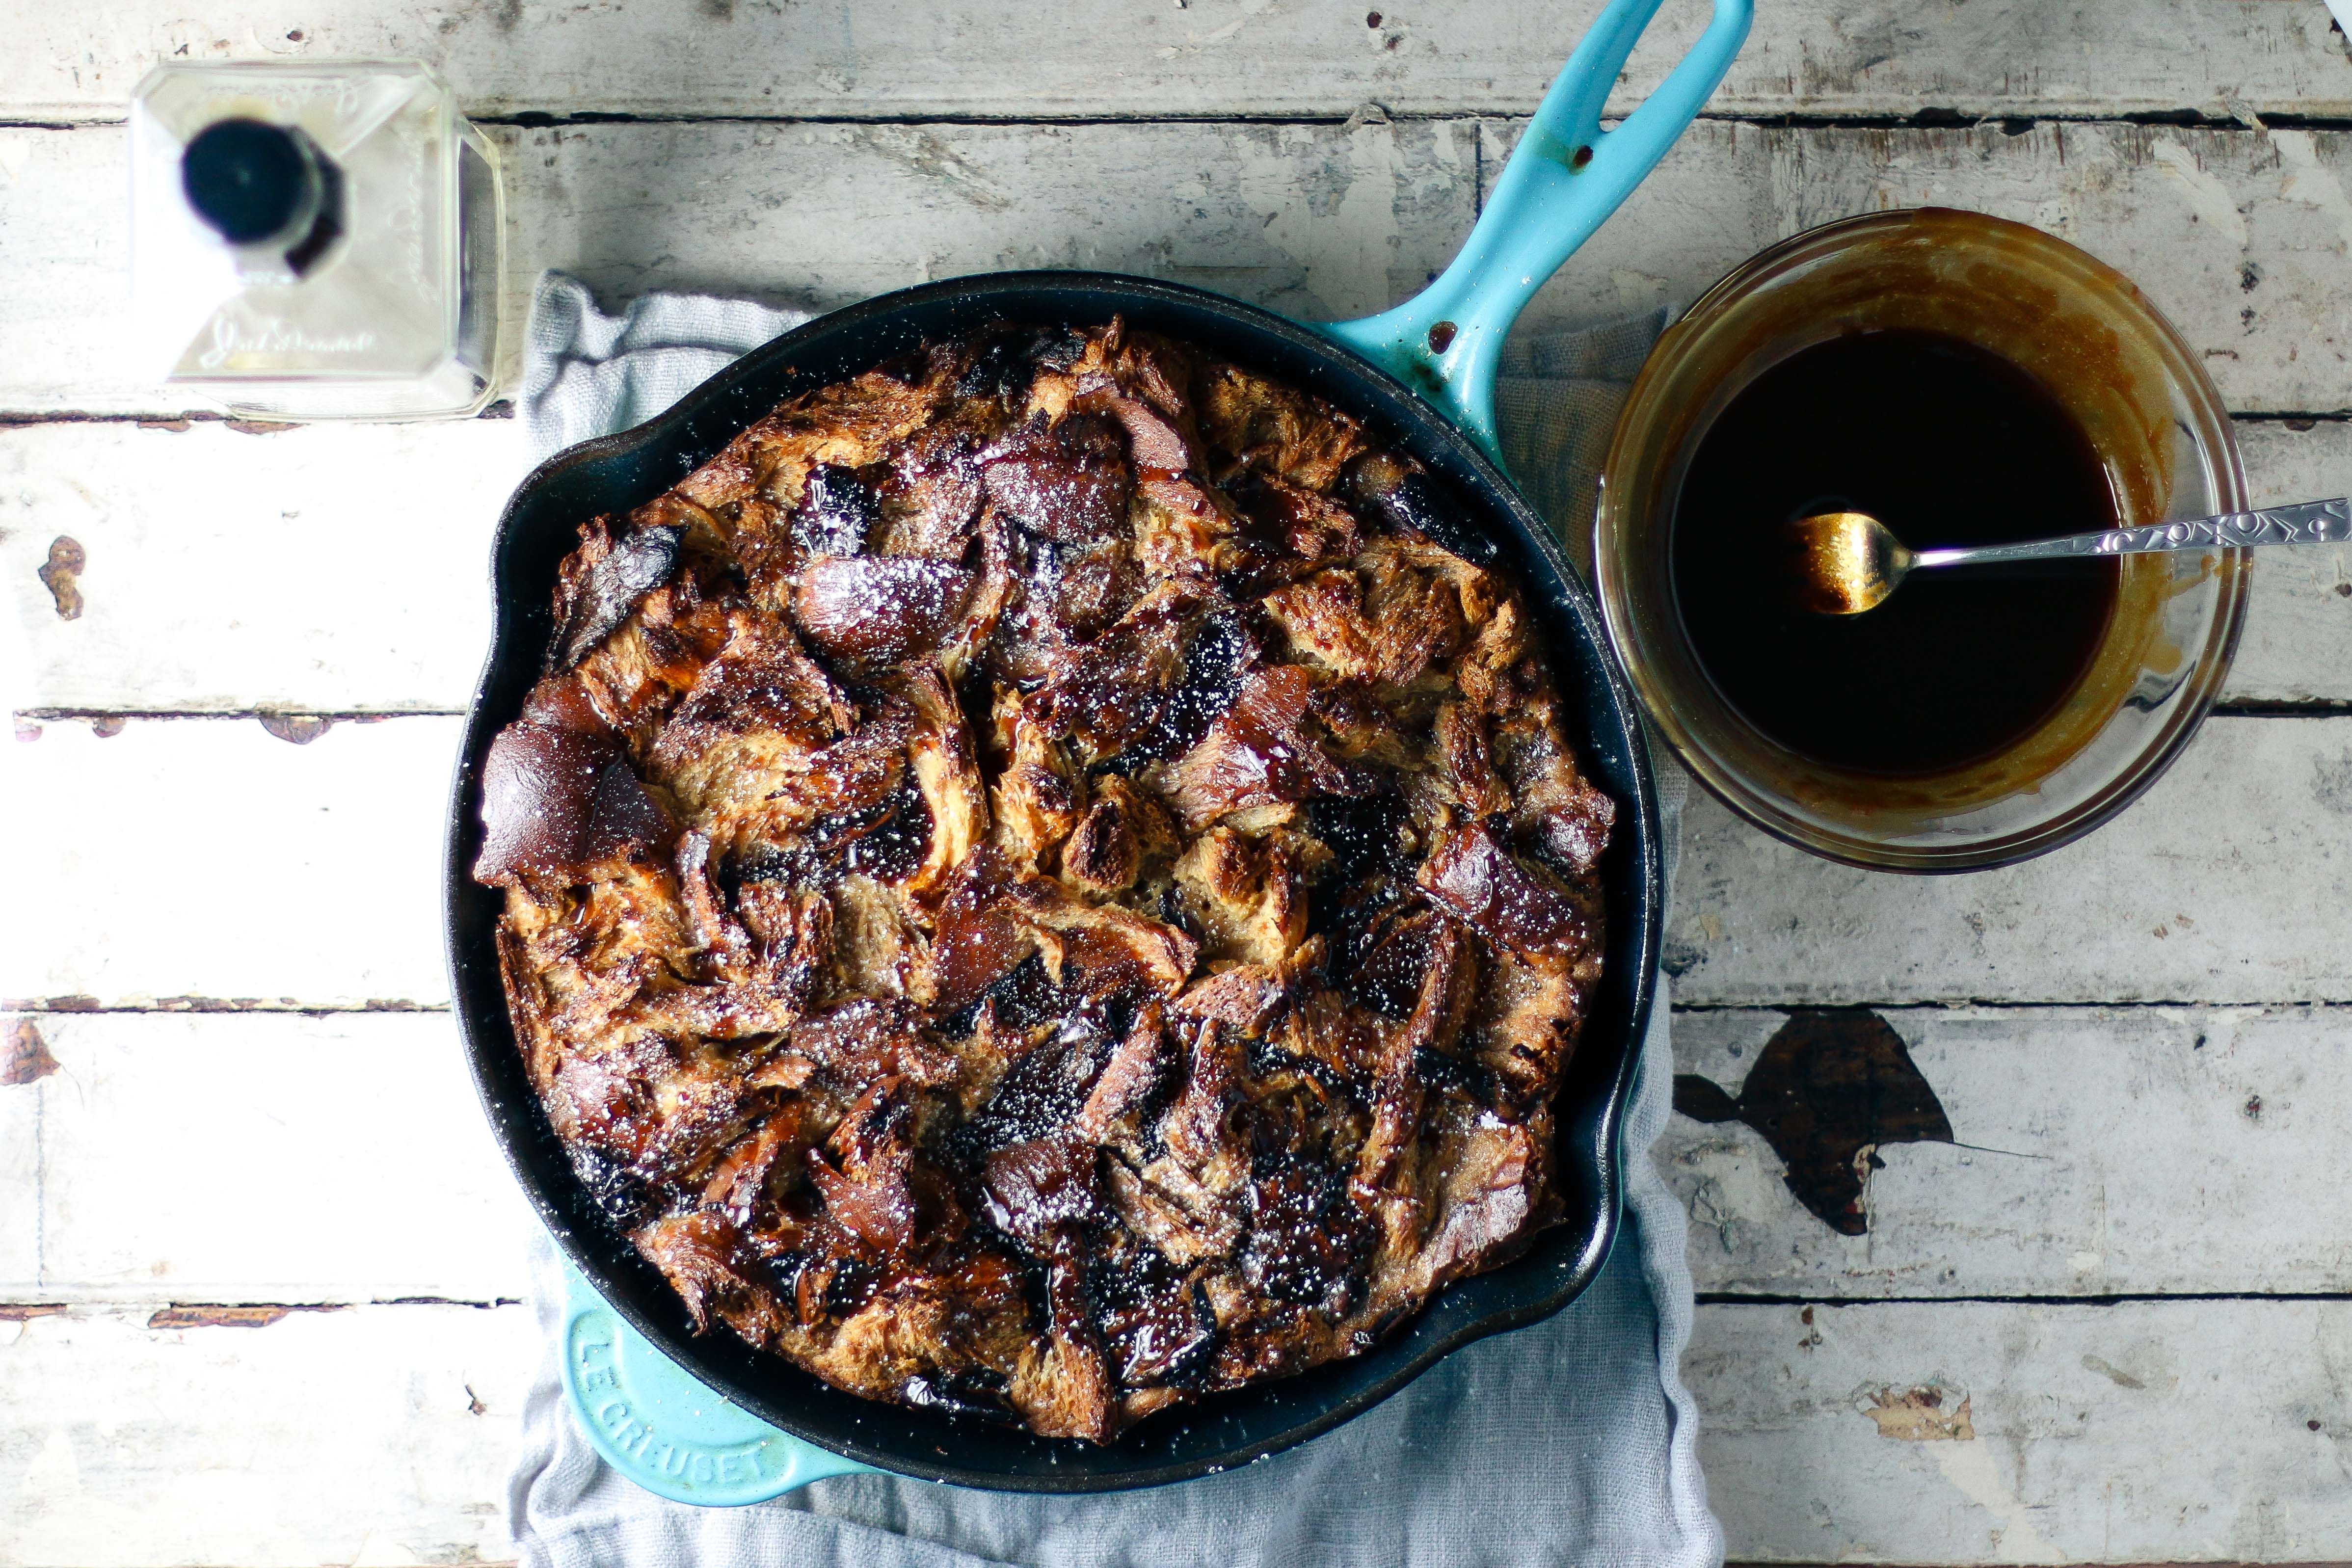 Whiskey Caramel Bread Pudding with Medjool Dates | I Will Not Eat Oysters